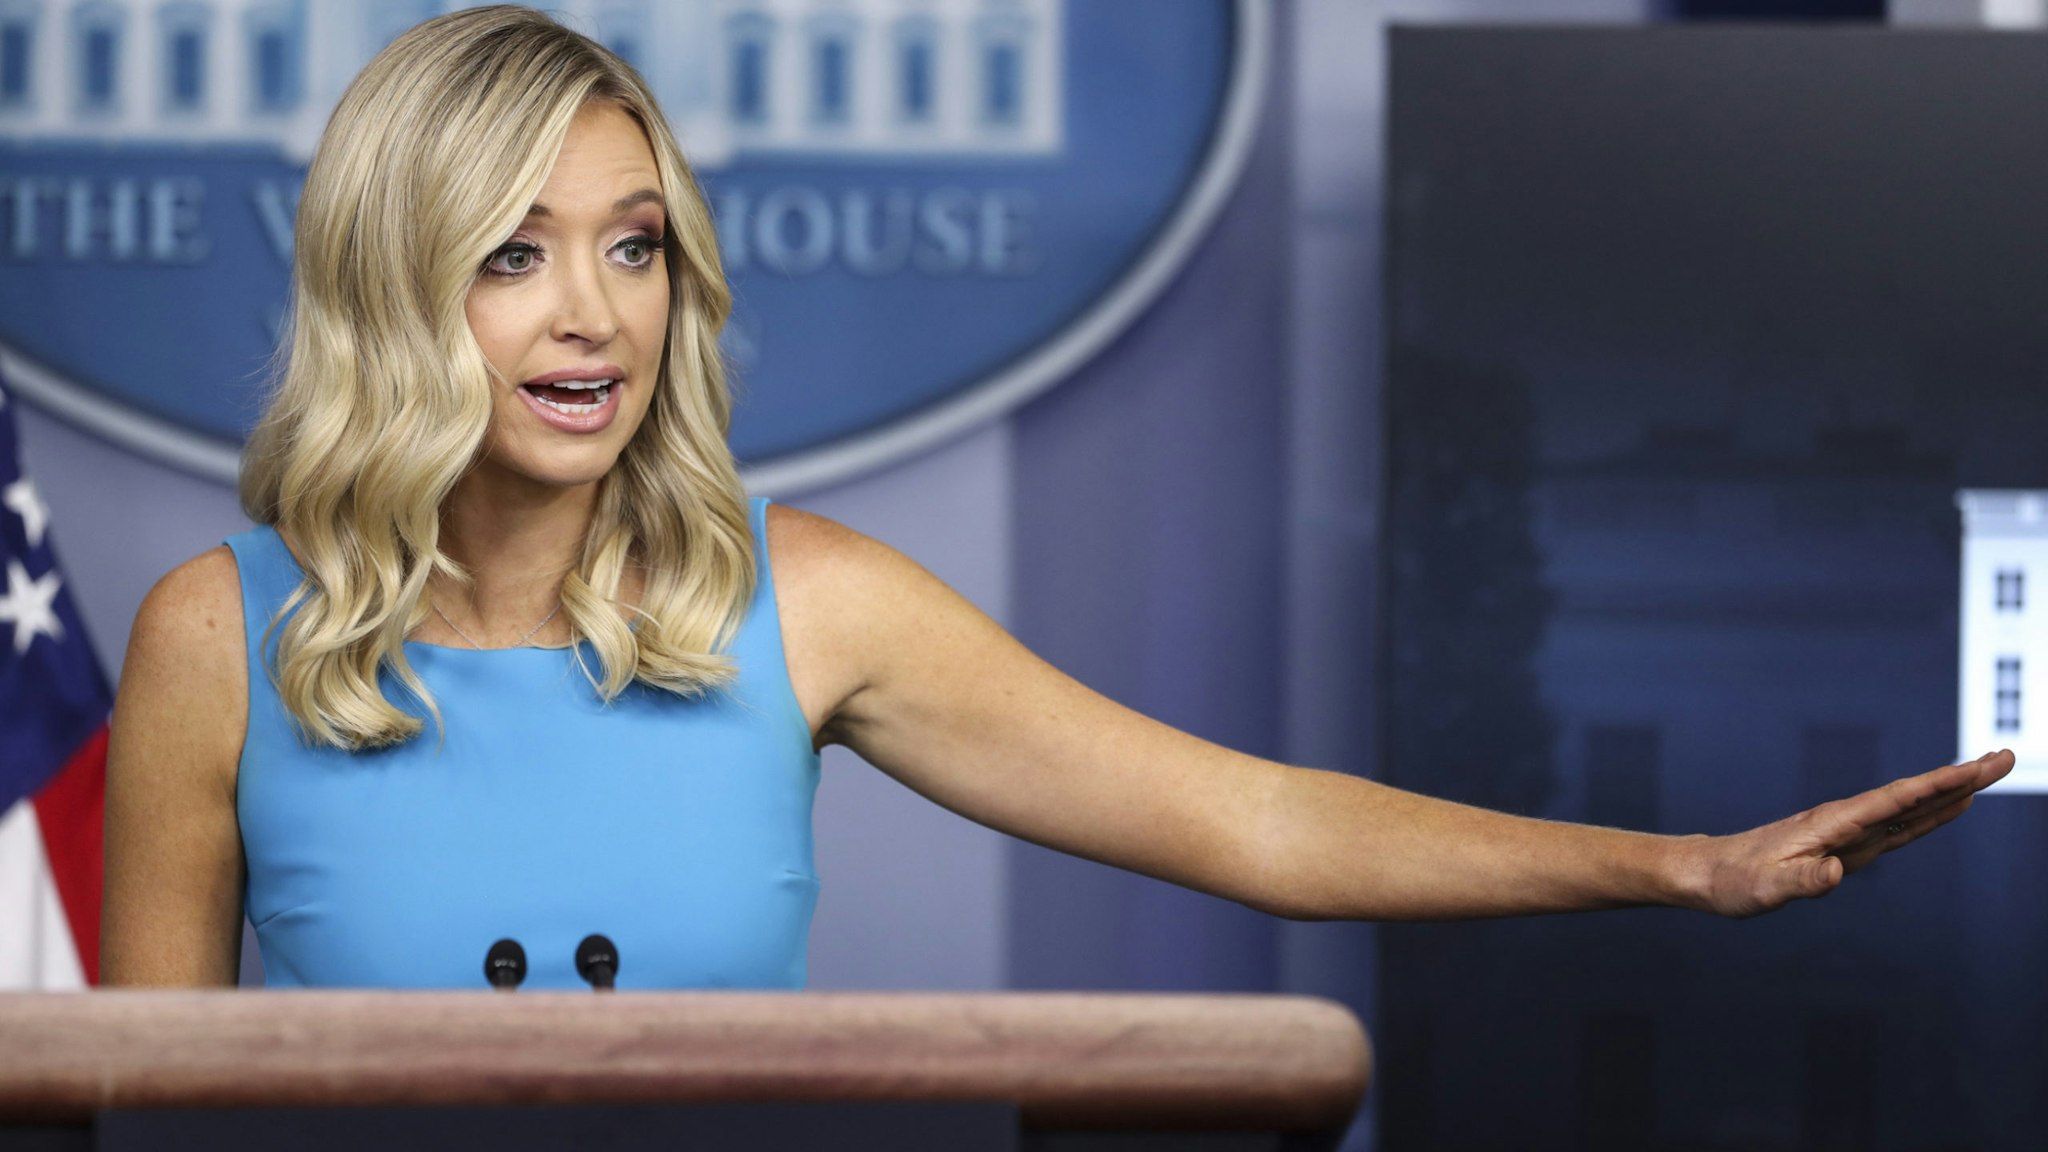 Kayleigh McEnany, White House press secretary, speaks during a briefing in Washington, D.C., U.S., on Wednesday, June 3, 2020.